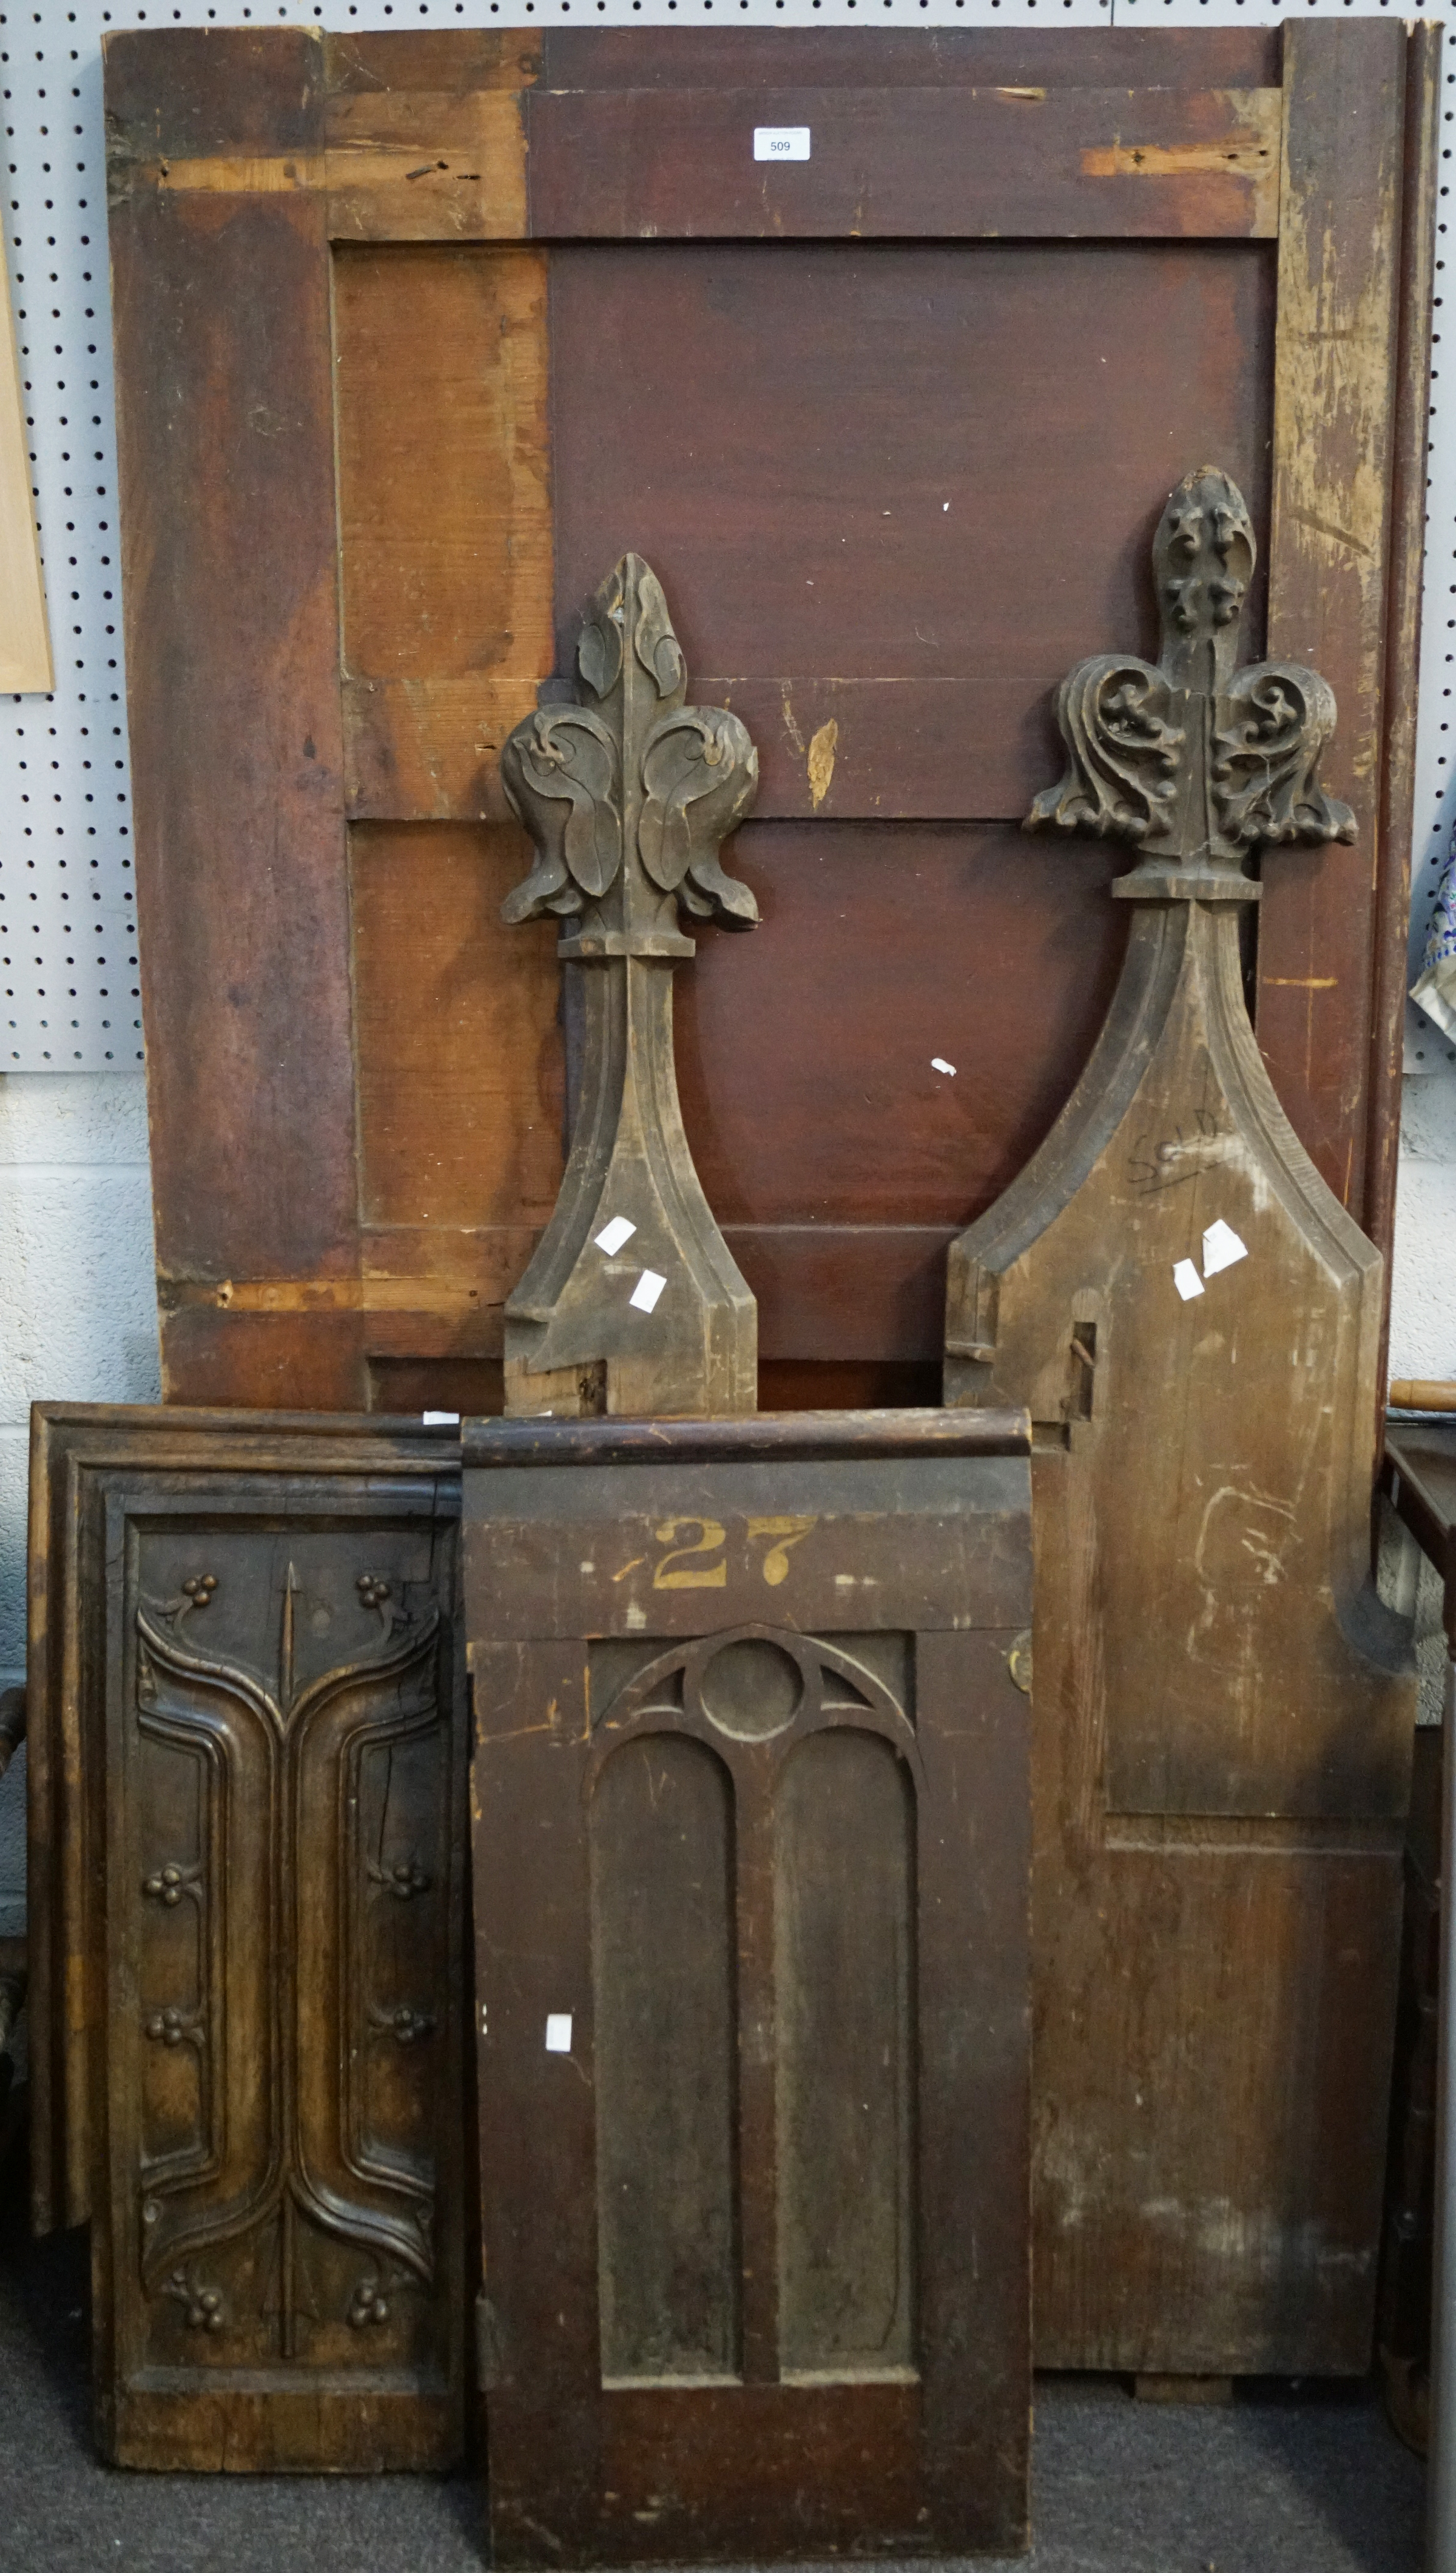 A dismantled church pew of various woods,